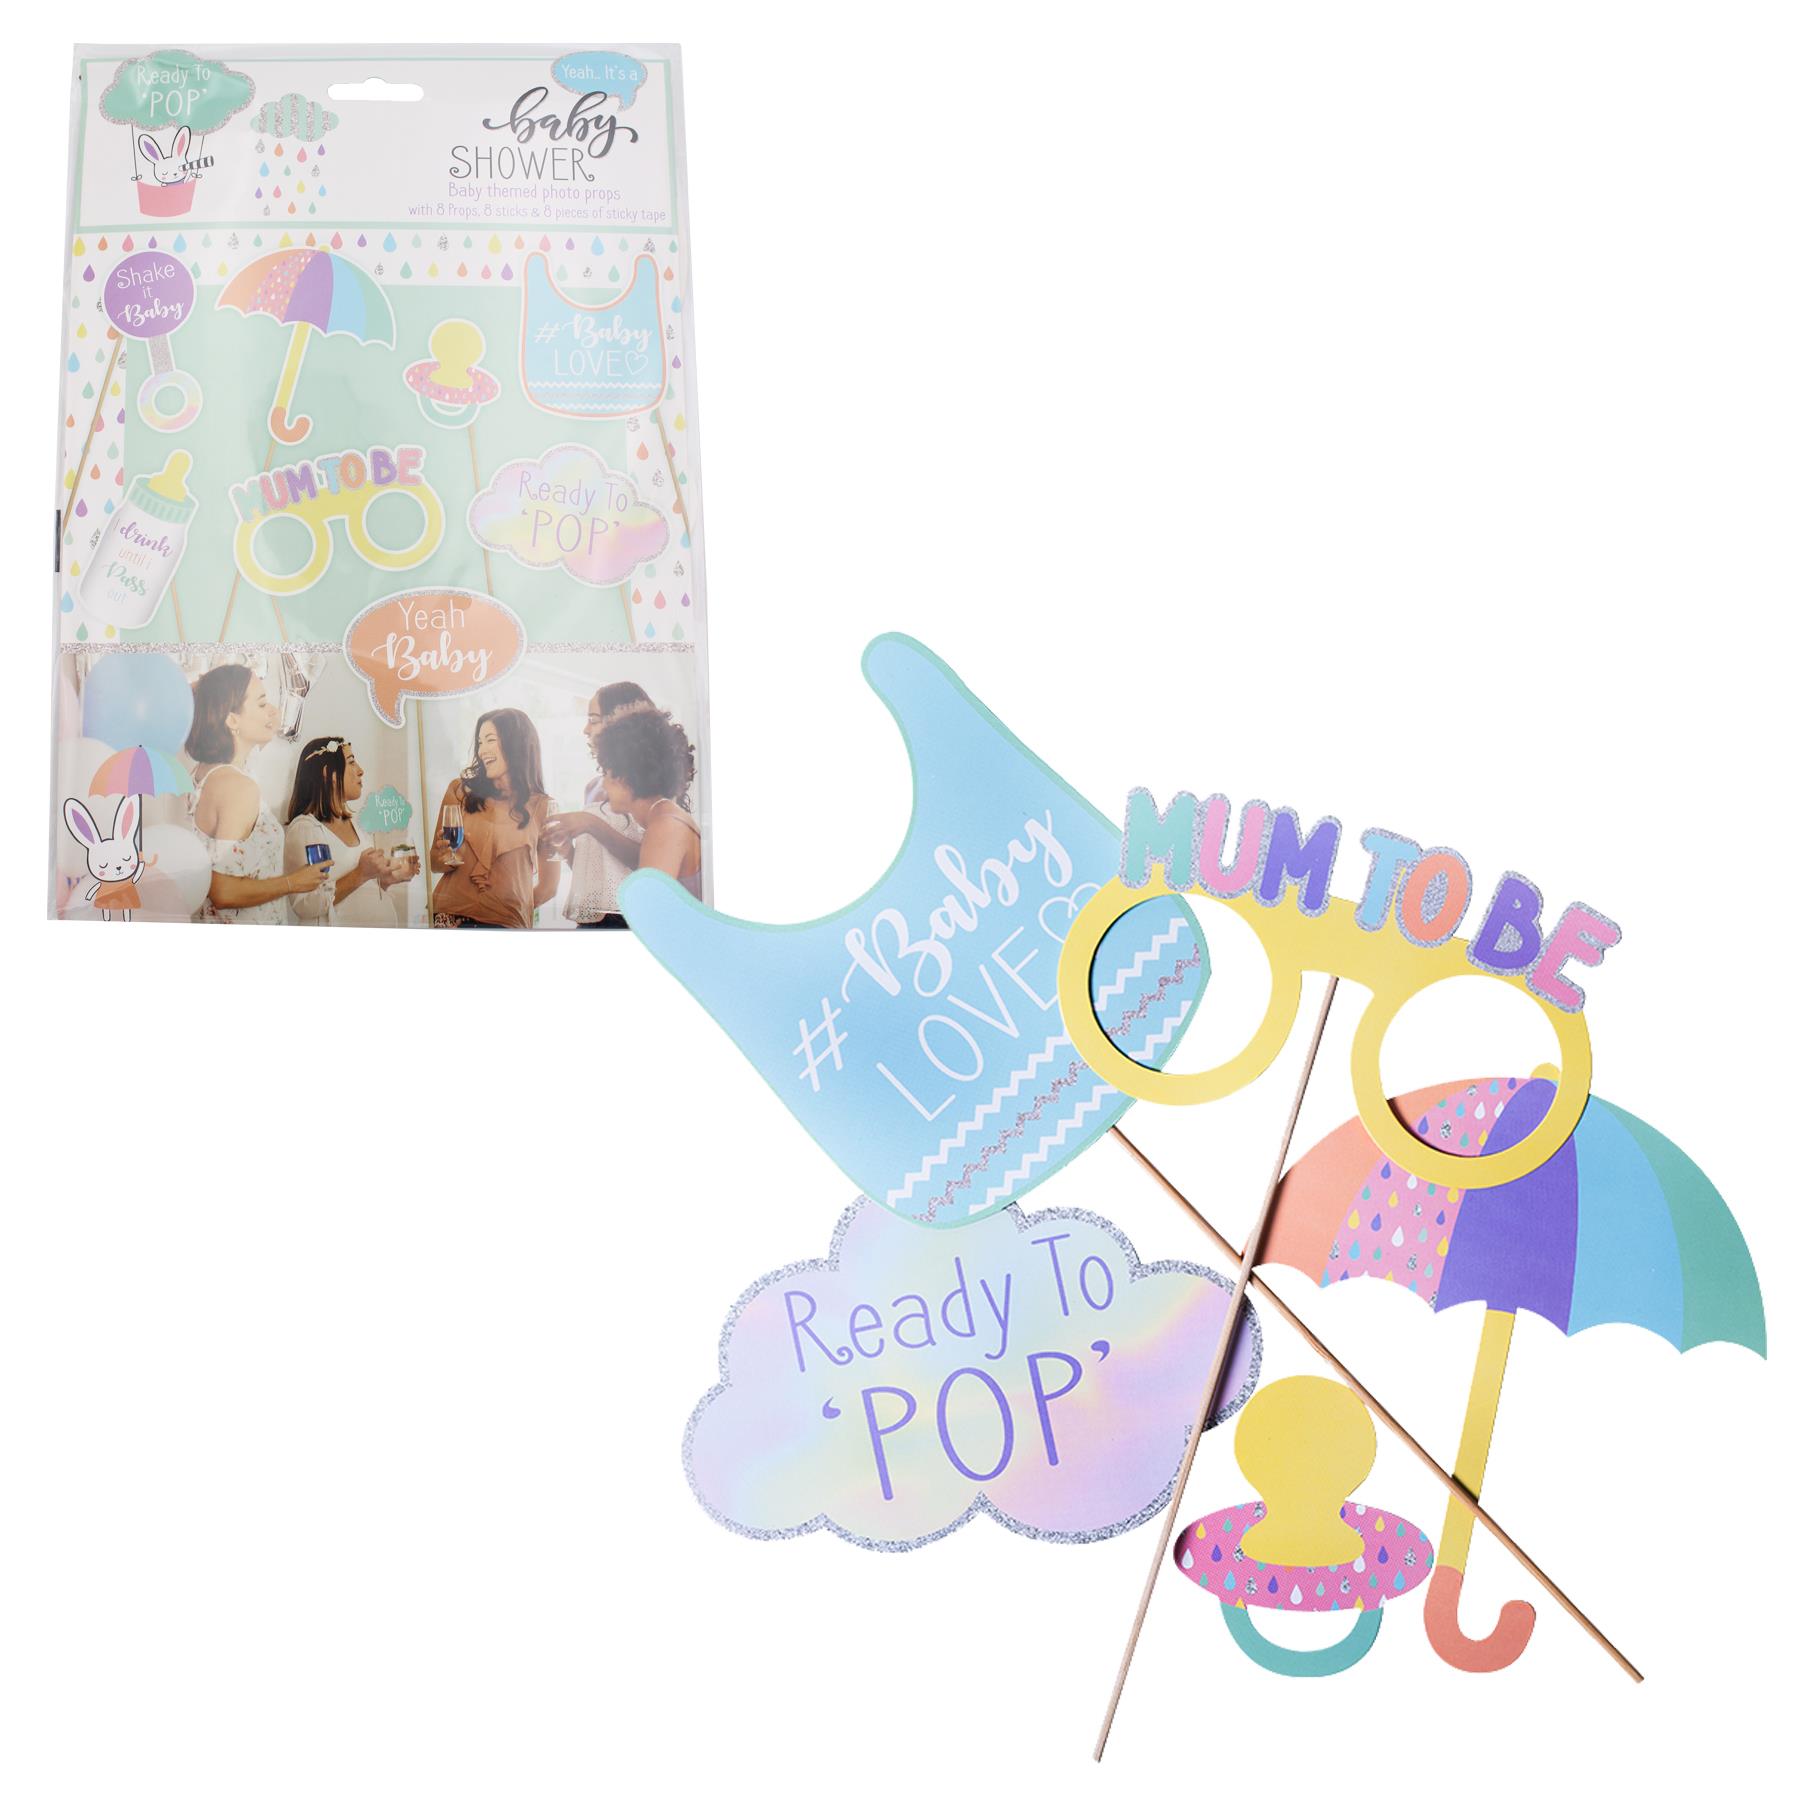 Baby Shower Activities Fun and Games - Baby Themed Photo Props